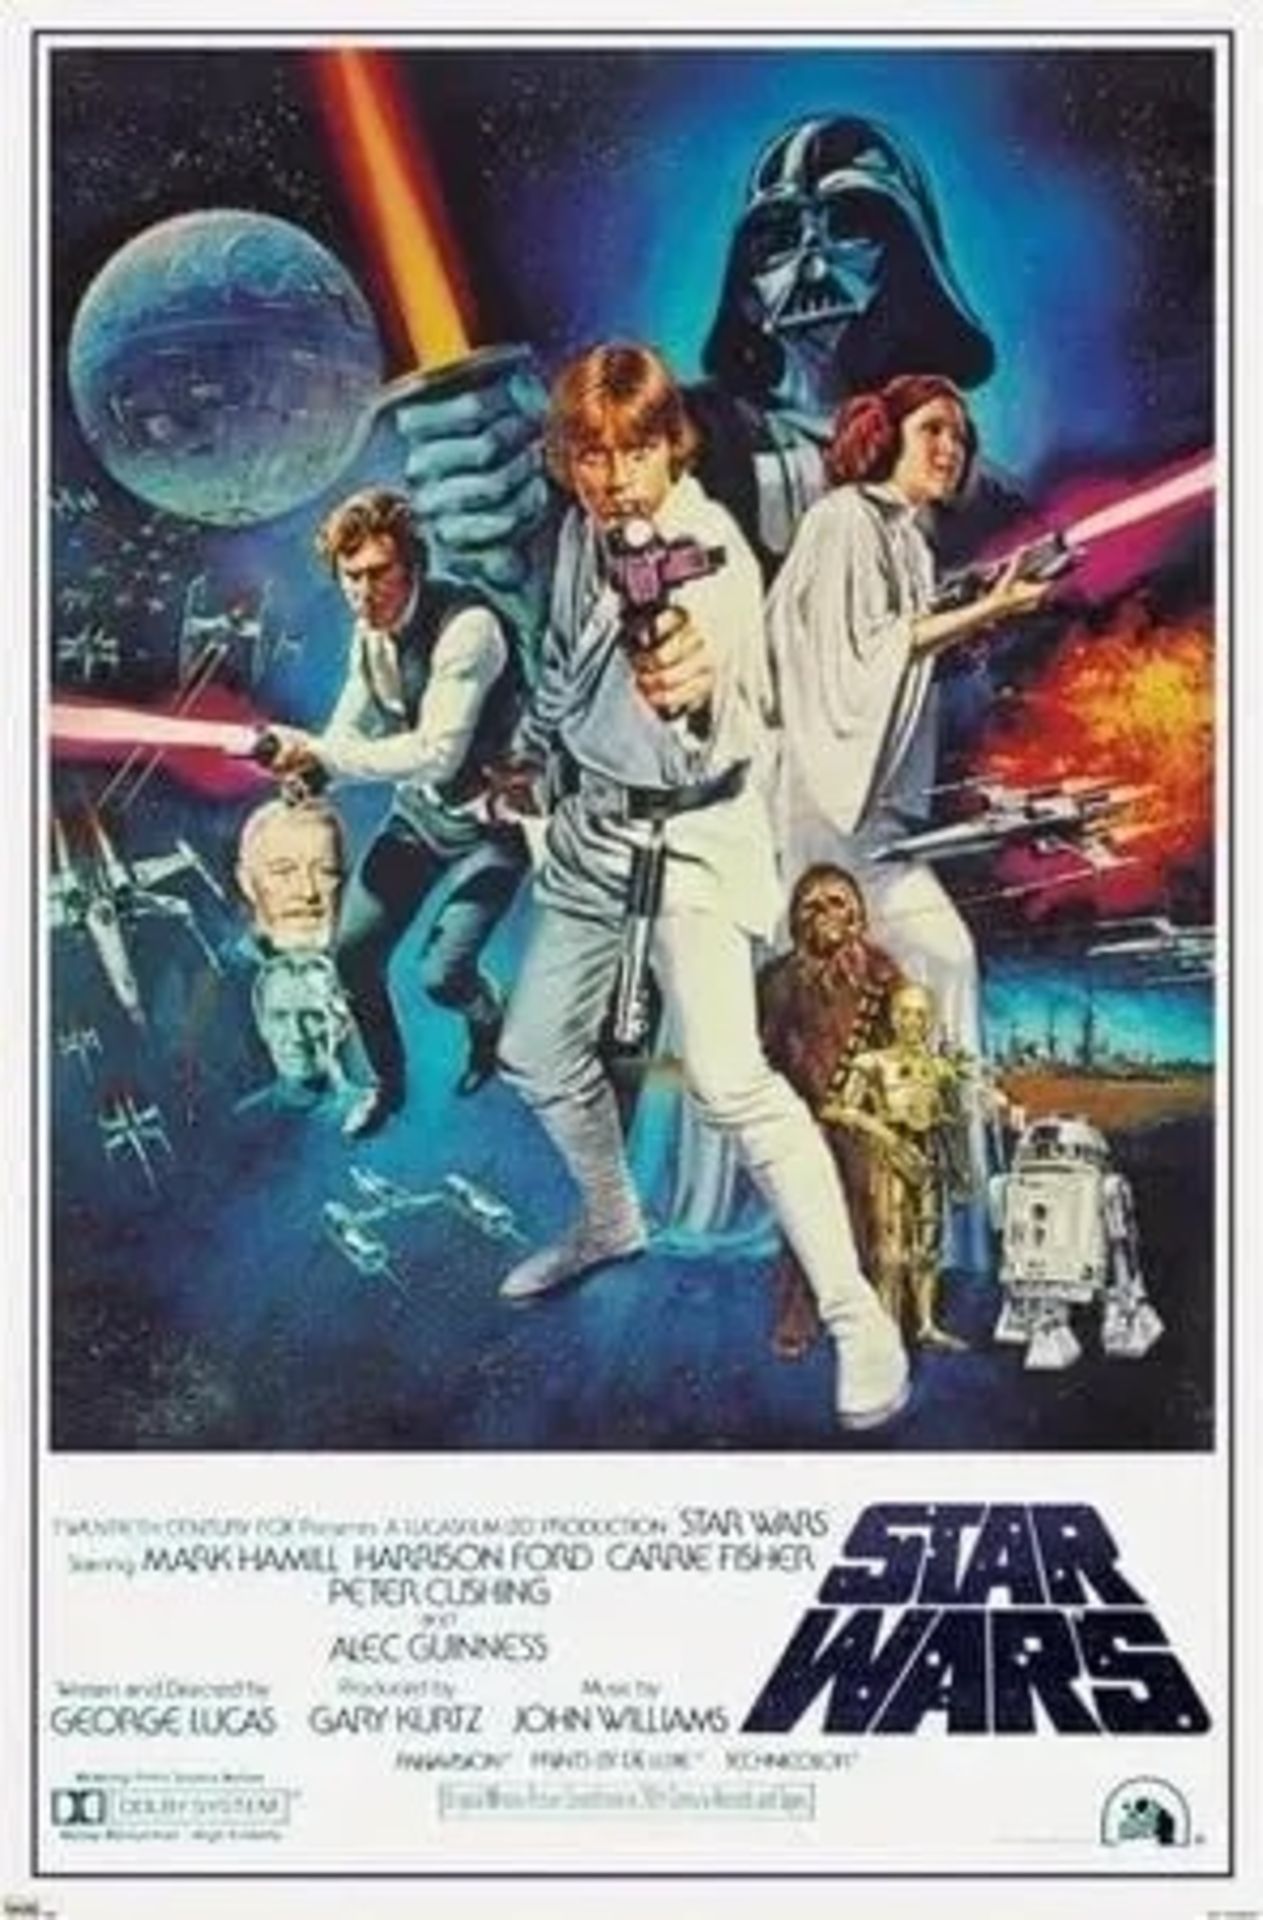 Star Wars "A New Hope" Poster